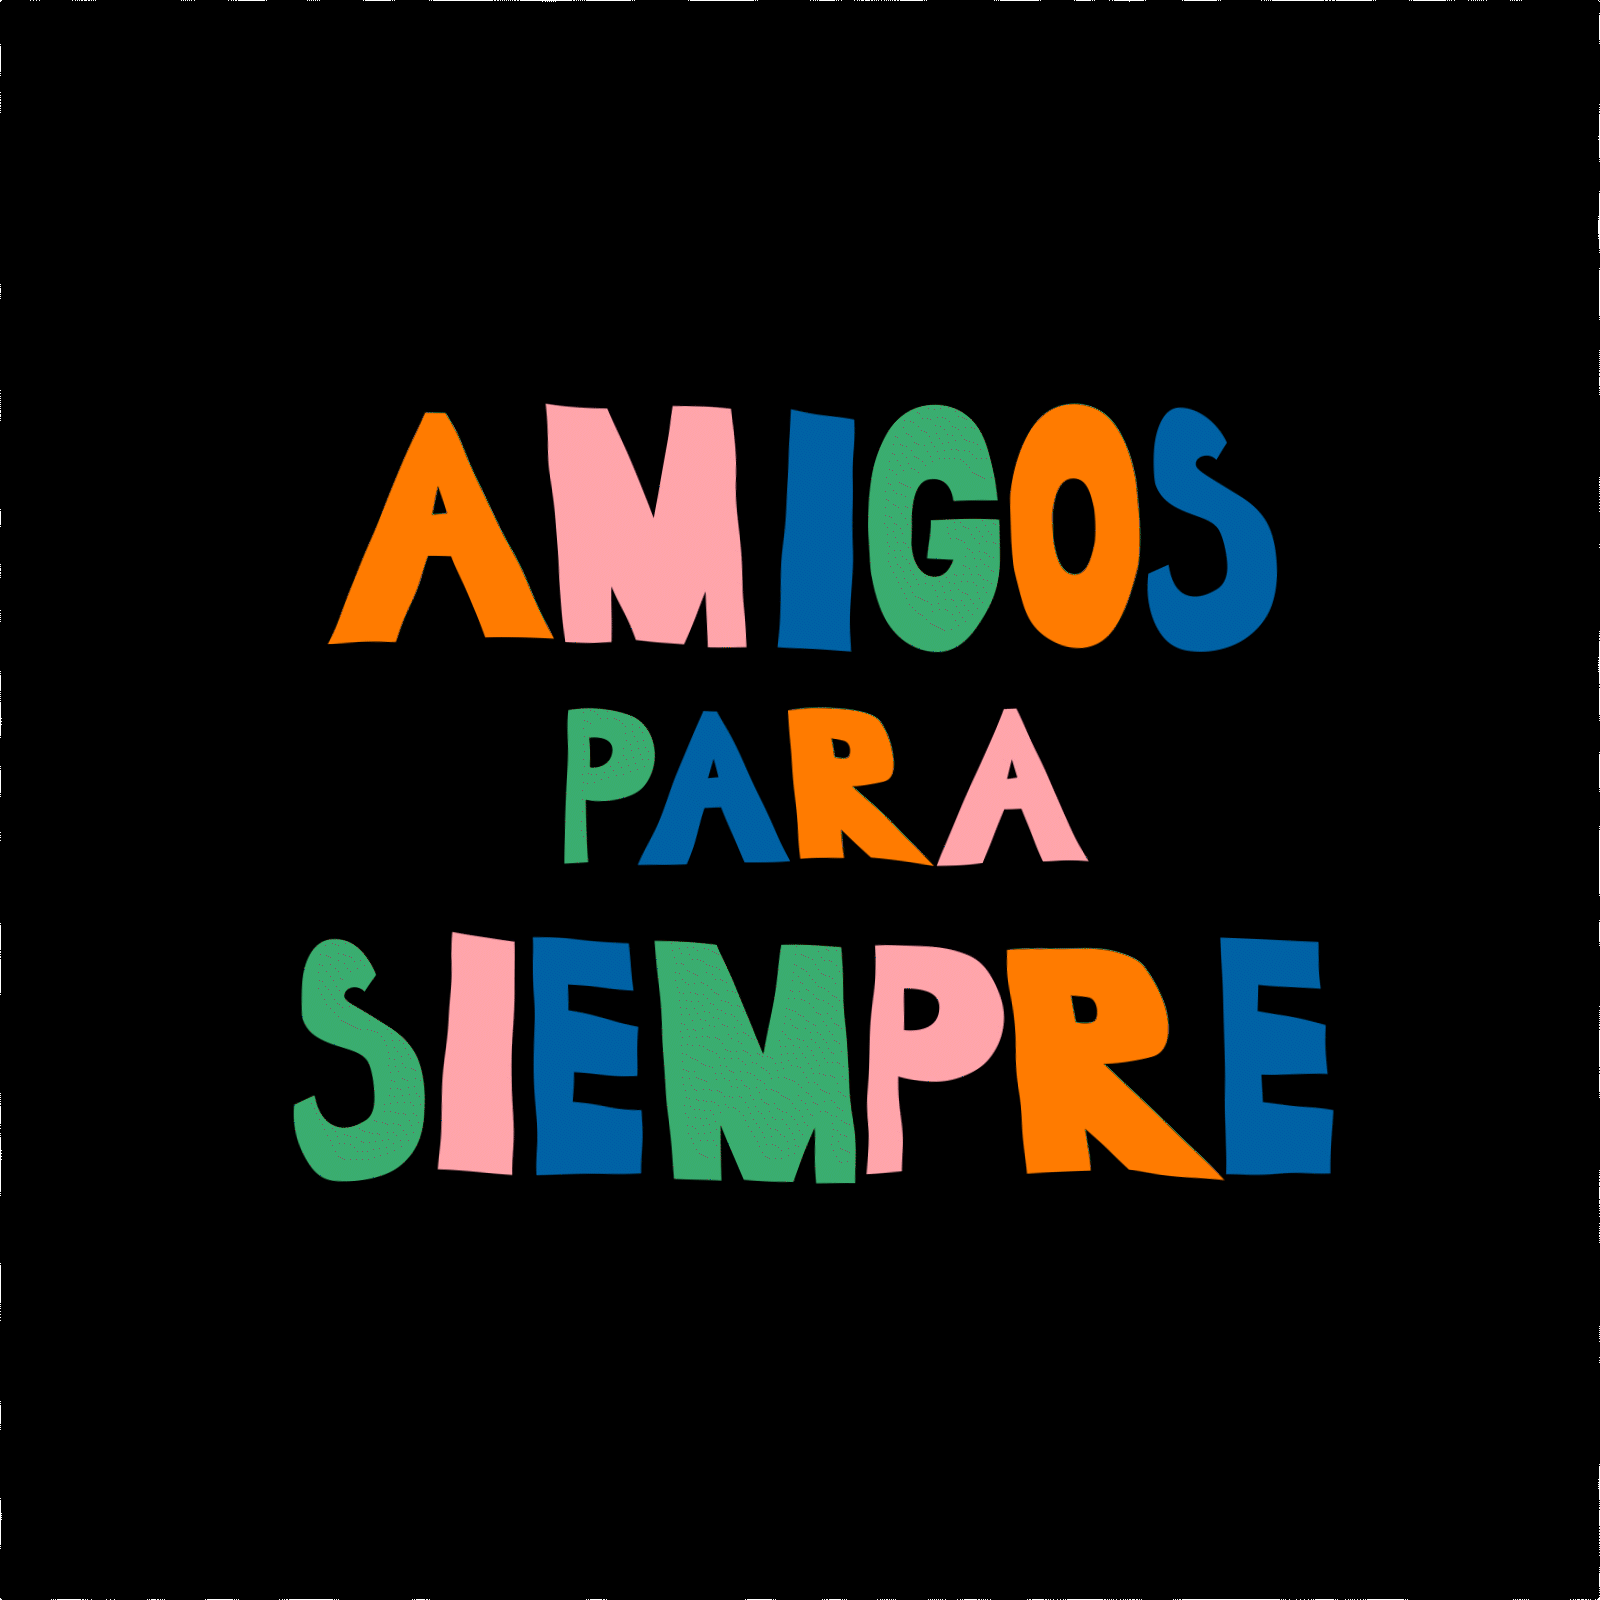 Amigos para sempre! Animated Picture Codes and Downloads #62823321